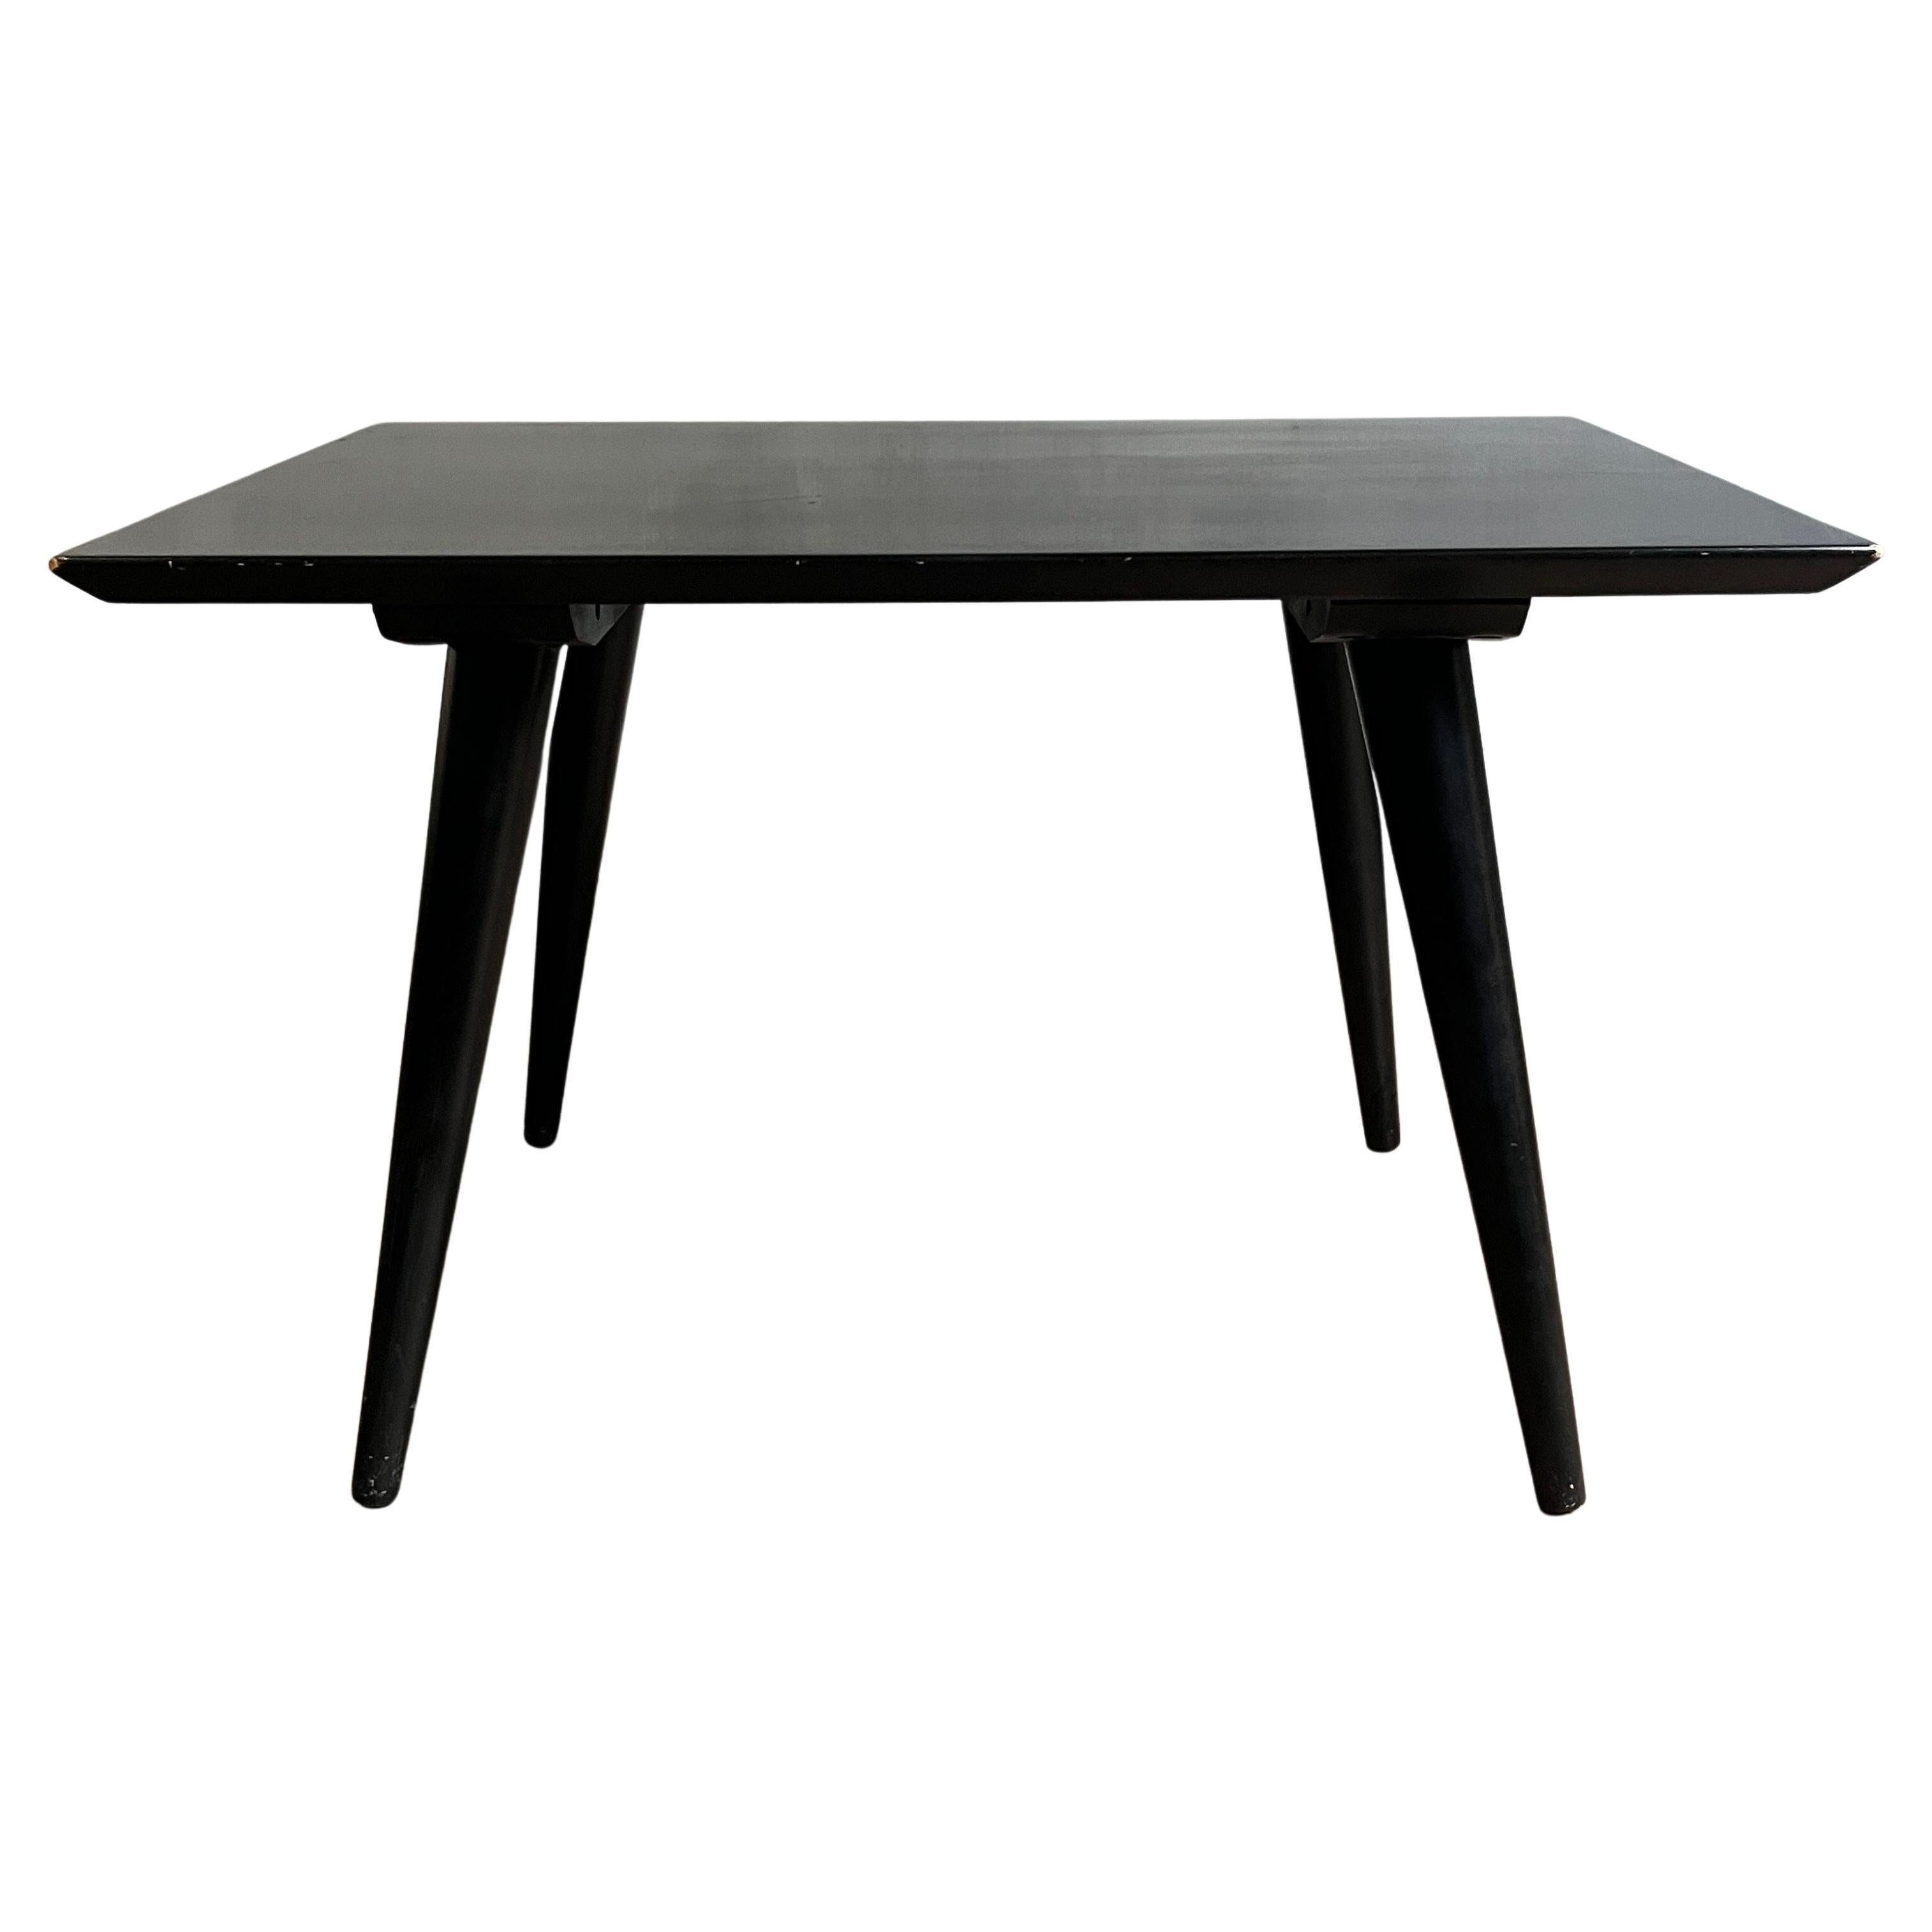 Beautiful Paul McCobb Planner Group #1546 solid maple side table or small coffee table with original heavy black lacquer finish with nice patina. Very delicate designed coffee table with tapered legs - All legs unscrew just fine. All solid maple.